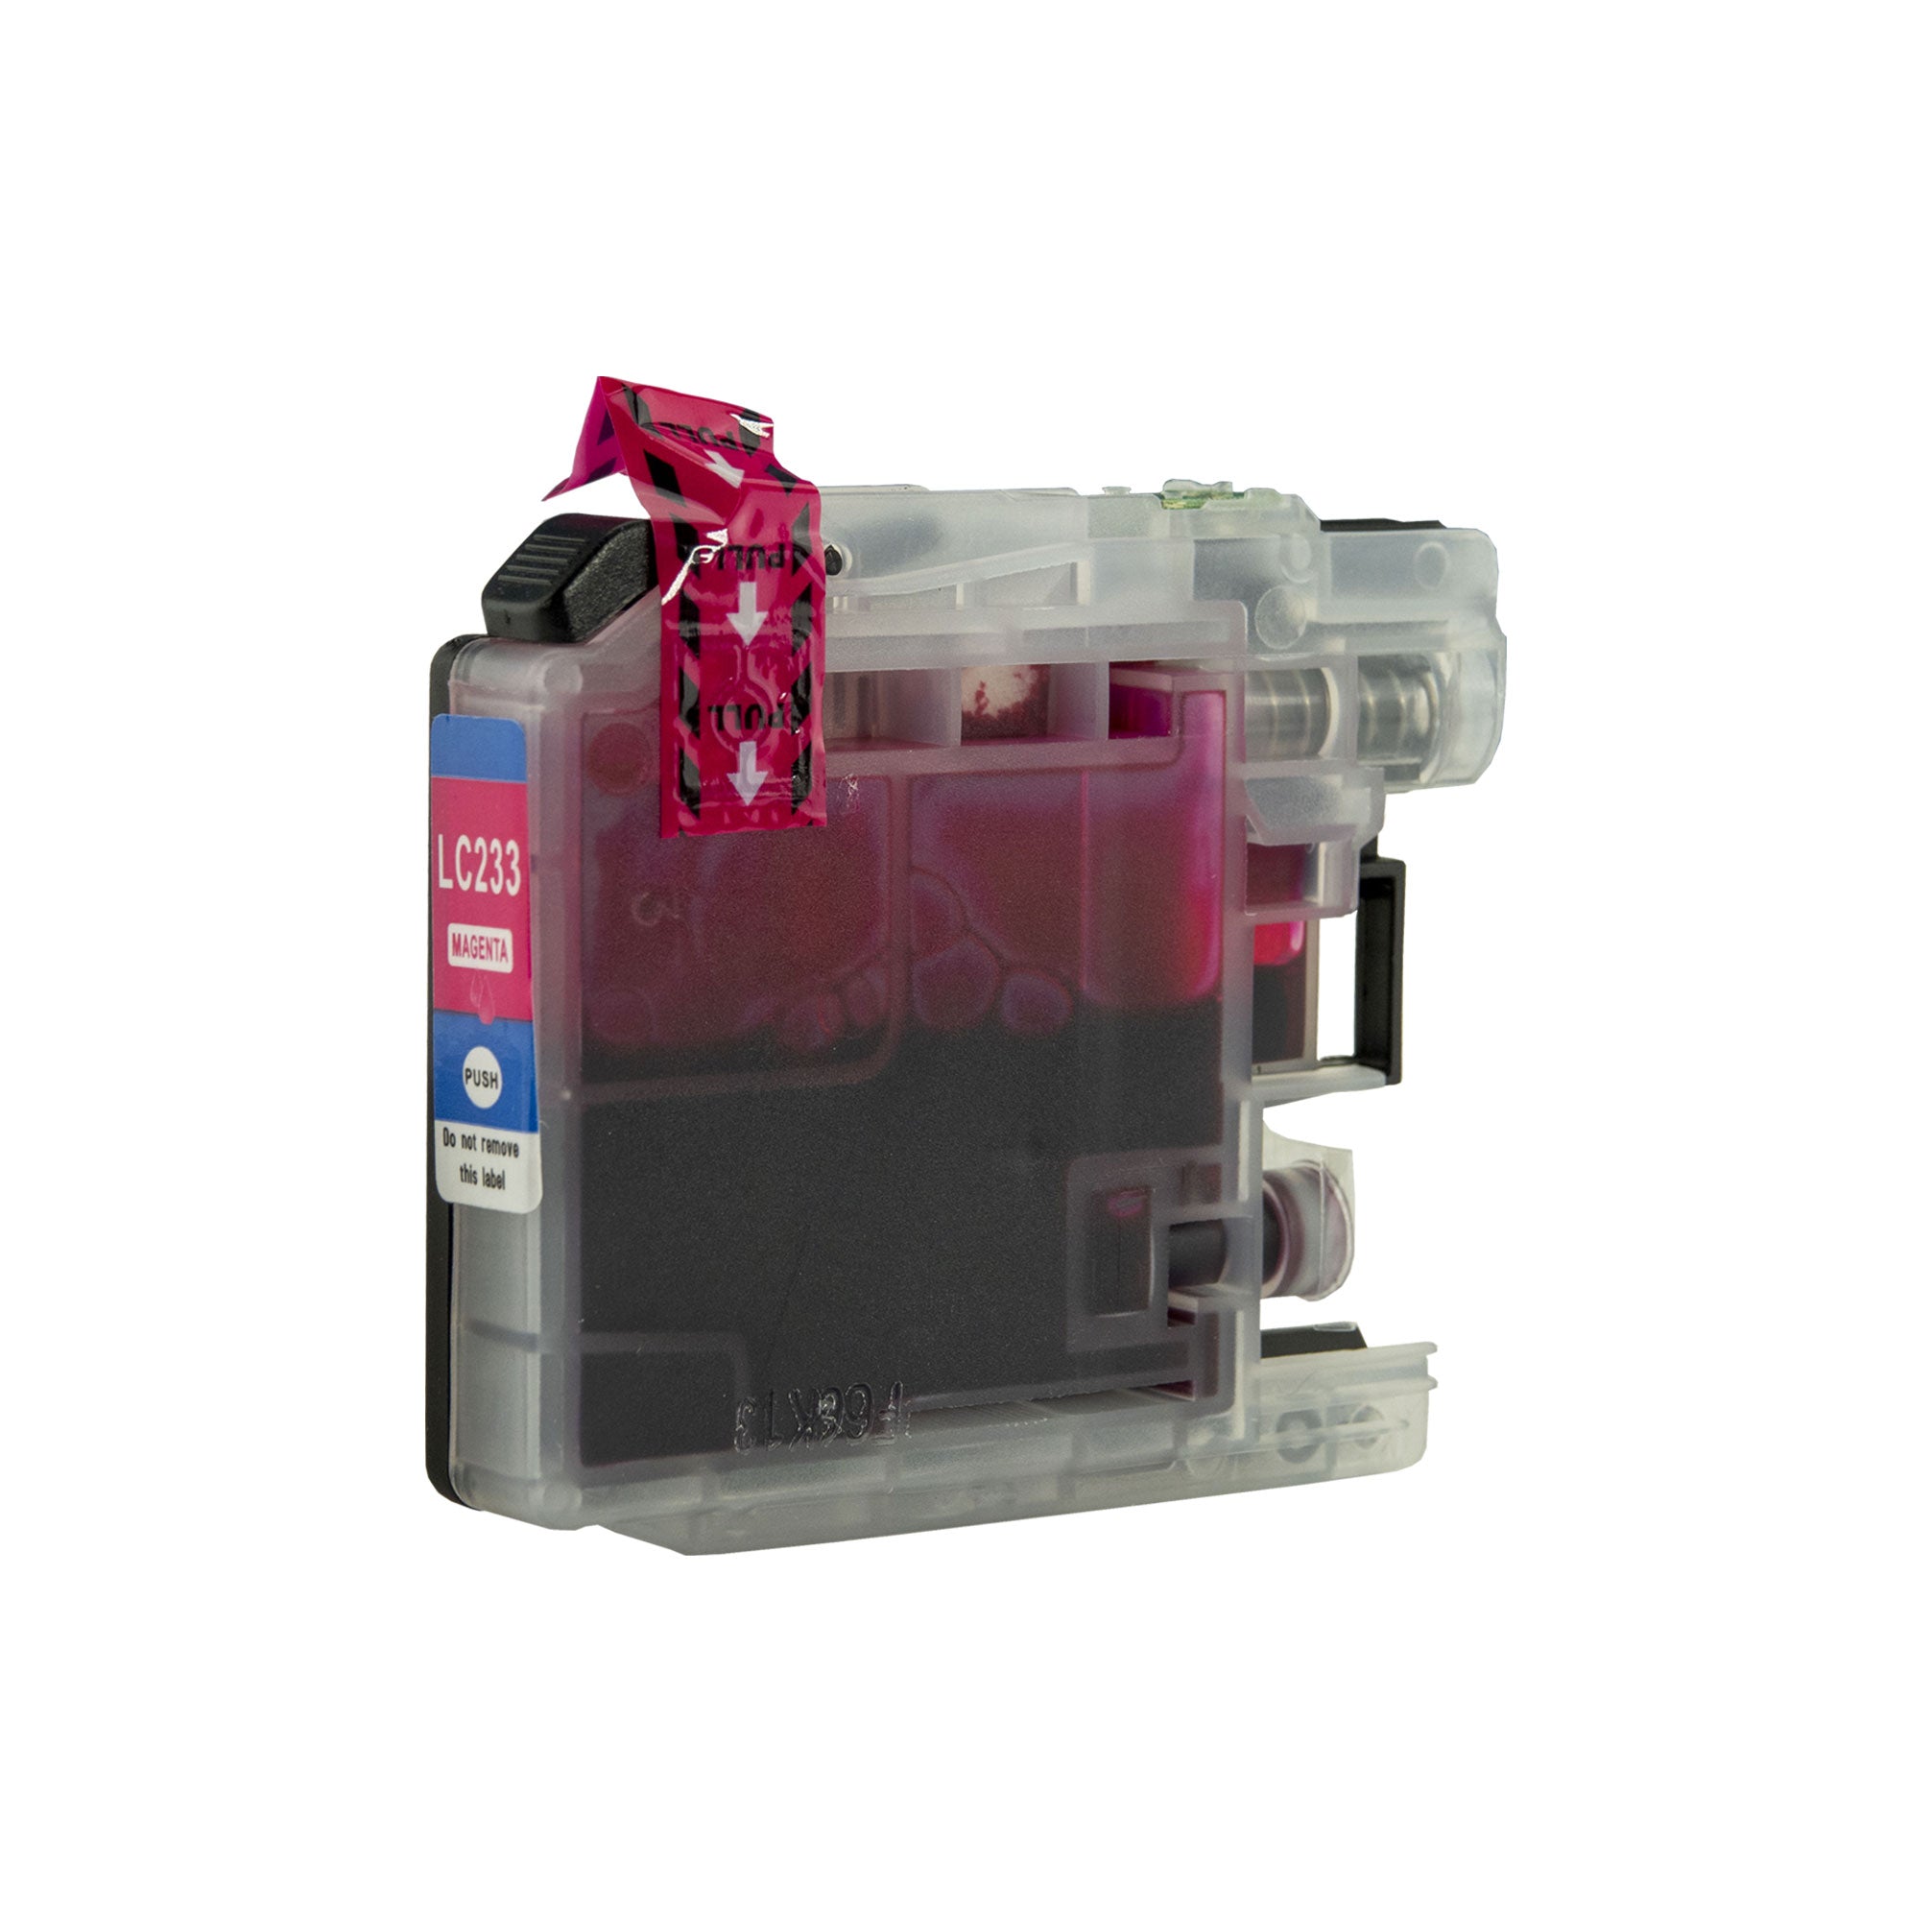 1x Compatible Brother LC-233 Magenta Ink Cartridges